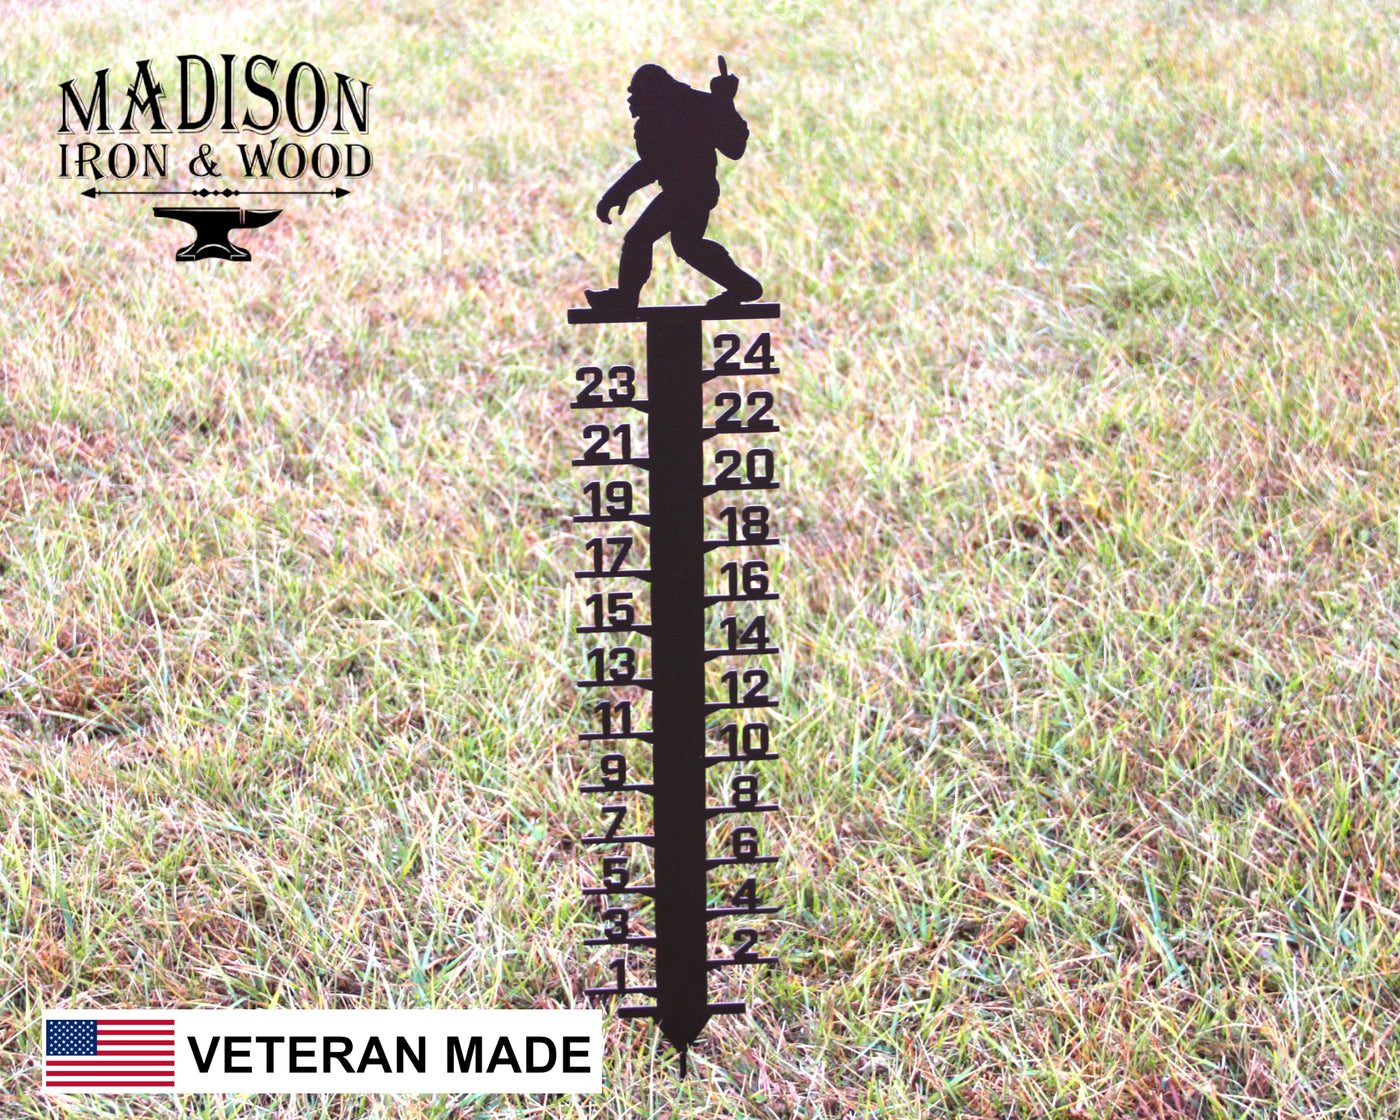 Bigfoot Middle Finger Snow Gauge - Madison Iron and Wood - Snow Gauge - metal outdoor decor - Steel deocrations - american made products - veteran owned business products - fencing decorations - fencing supplies - custom wall decorations - personalized wall signs - steel - decorative post caps - steel post caps - metal post caps - brackets - structural brackets - home improvement - easter - easter decorations - easter gift - easter yard decor